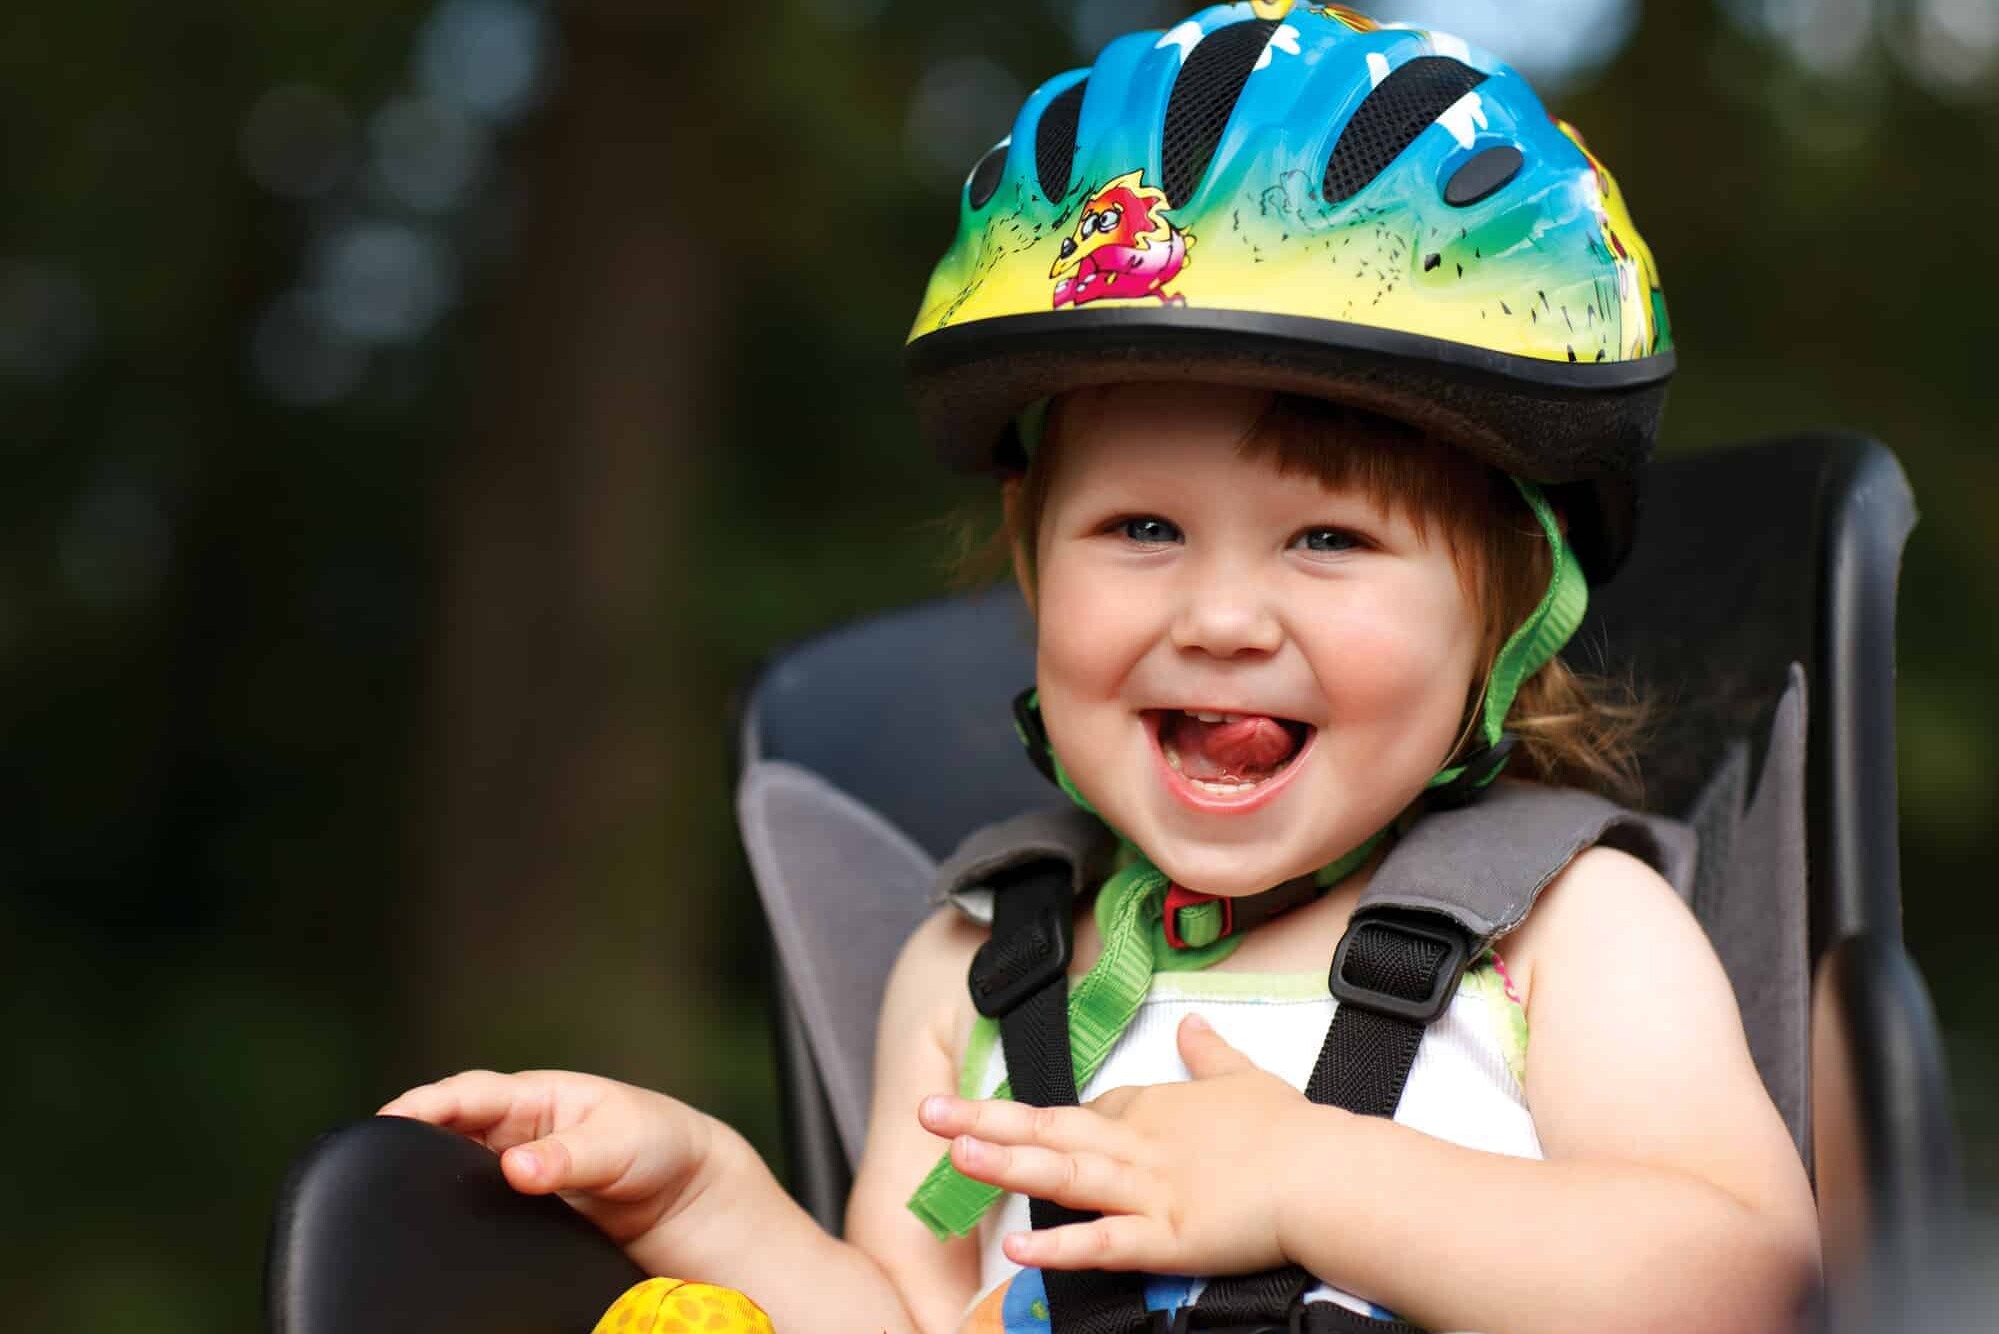 Read our in depth reviews on the best baby bike seats in 2021